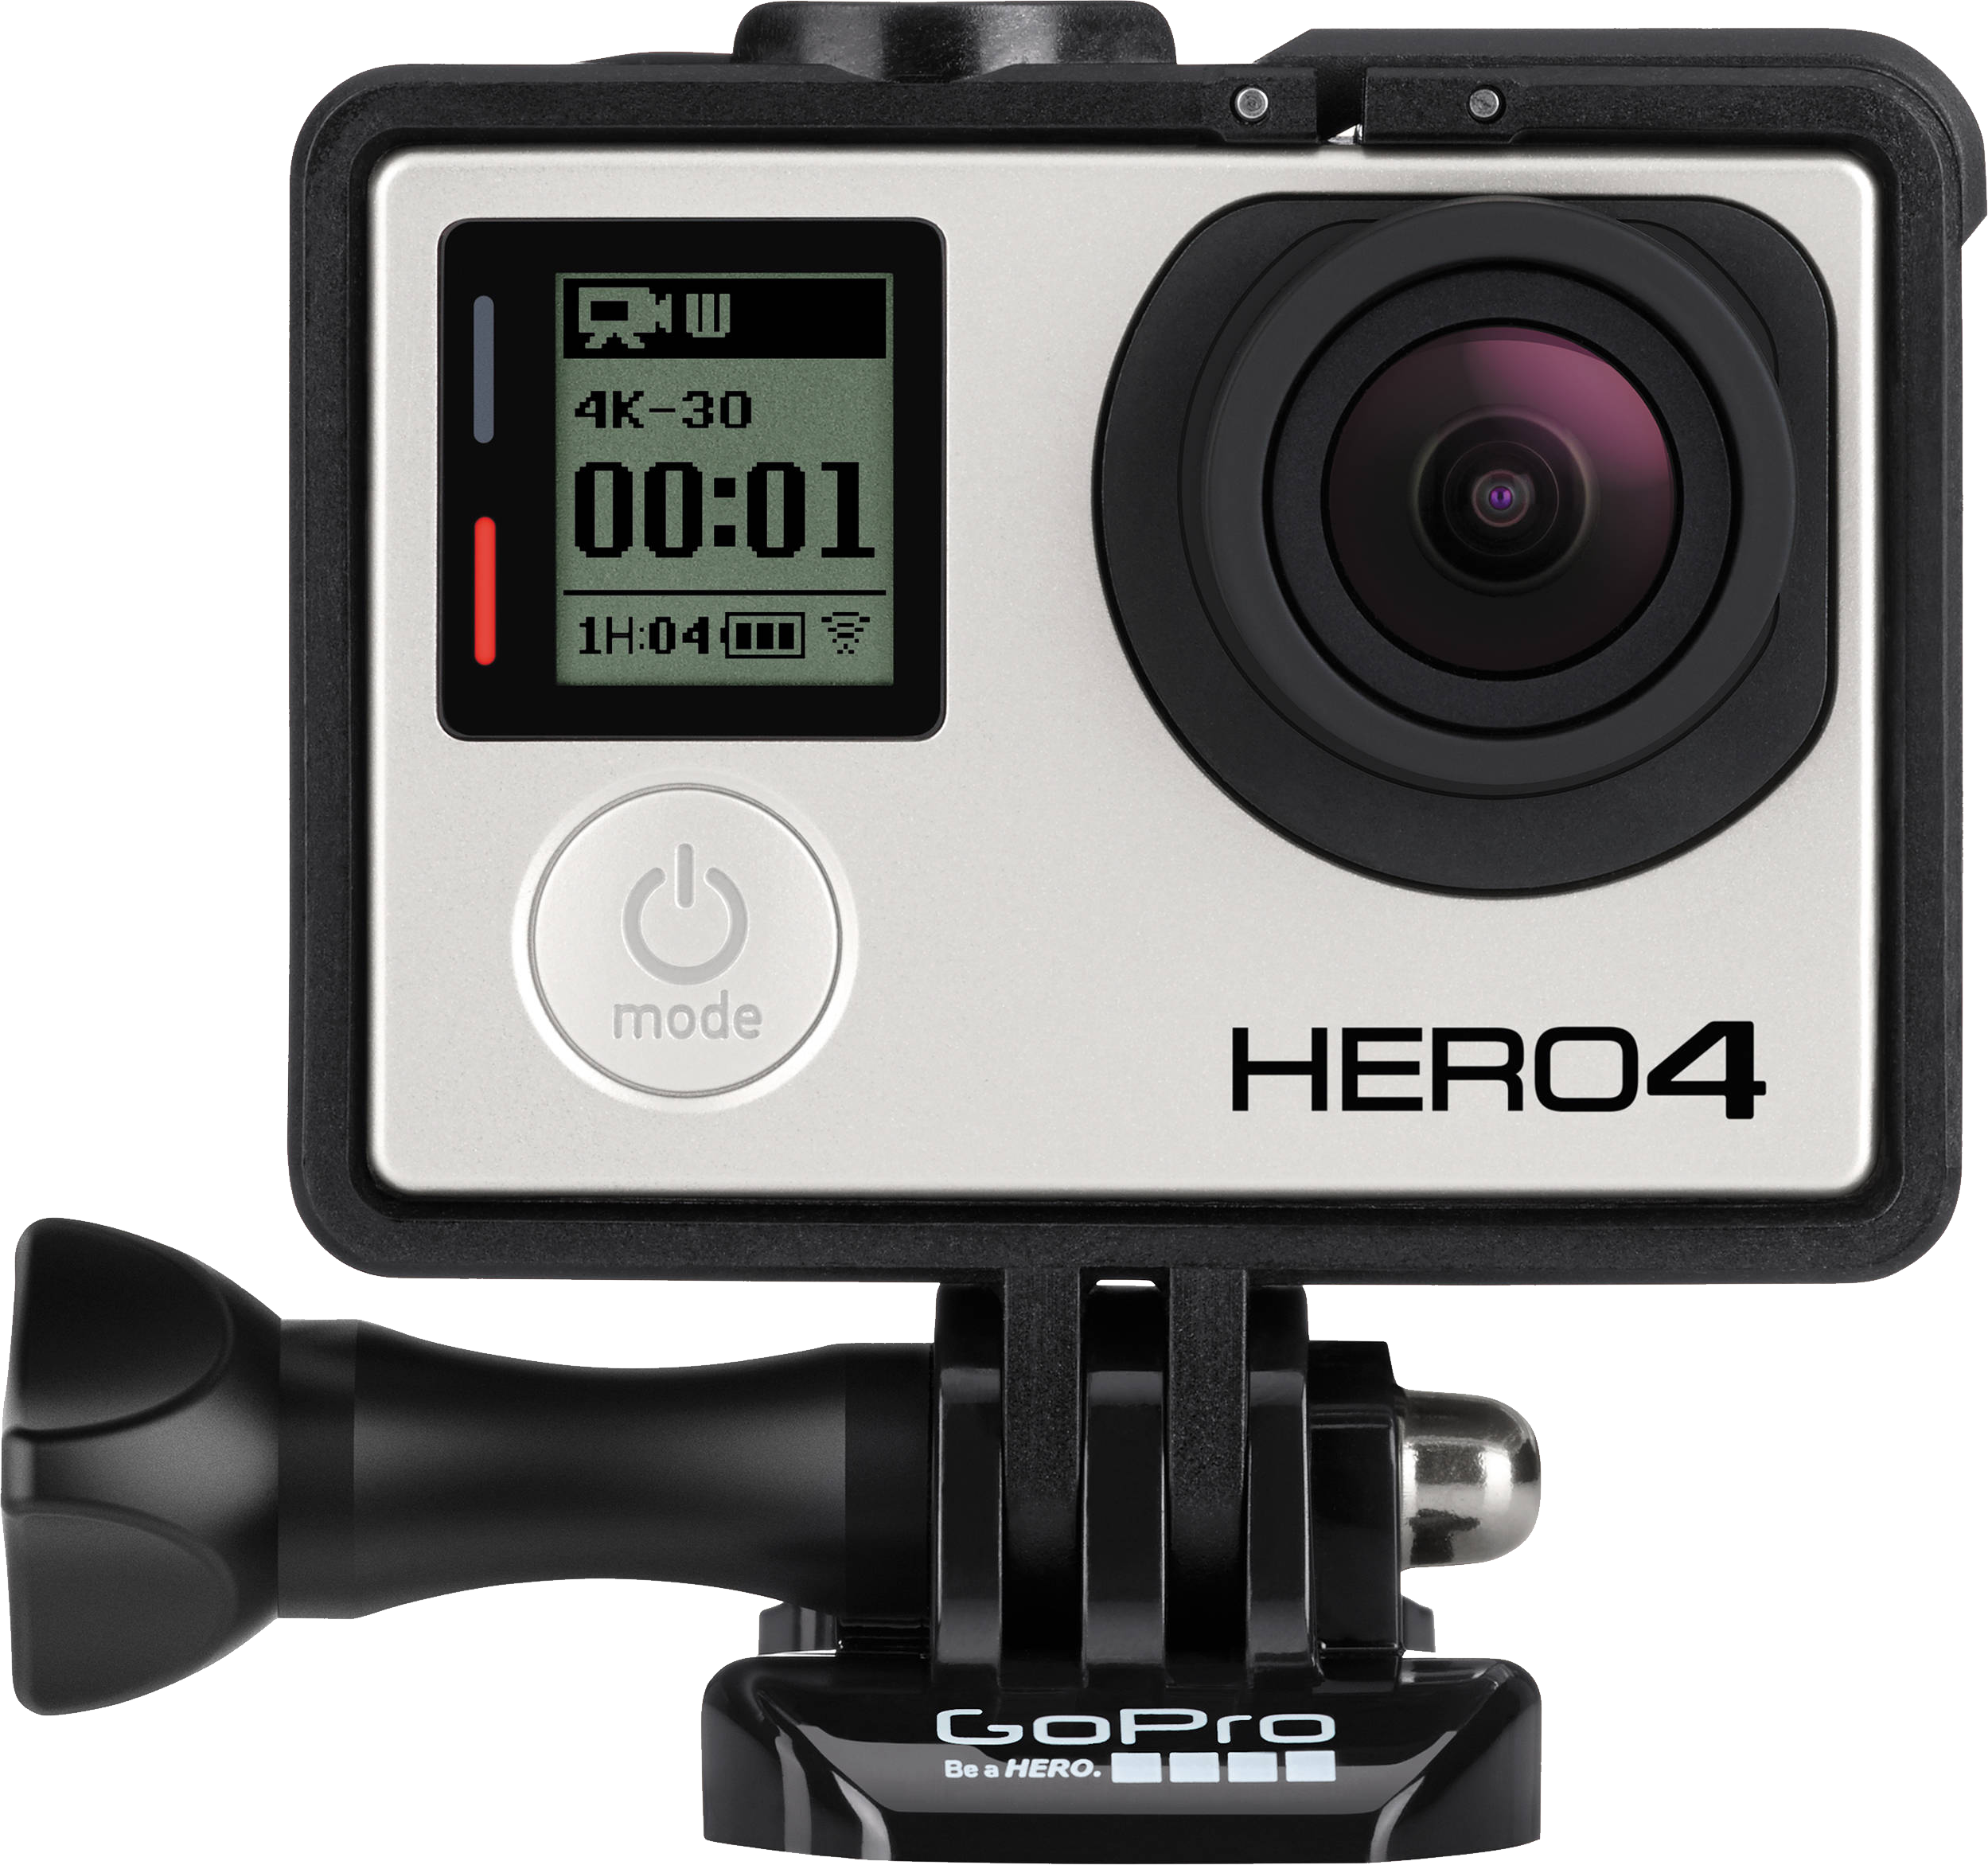 Simply the best GoPro, ever.